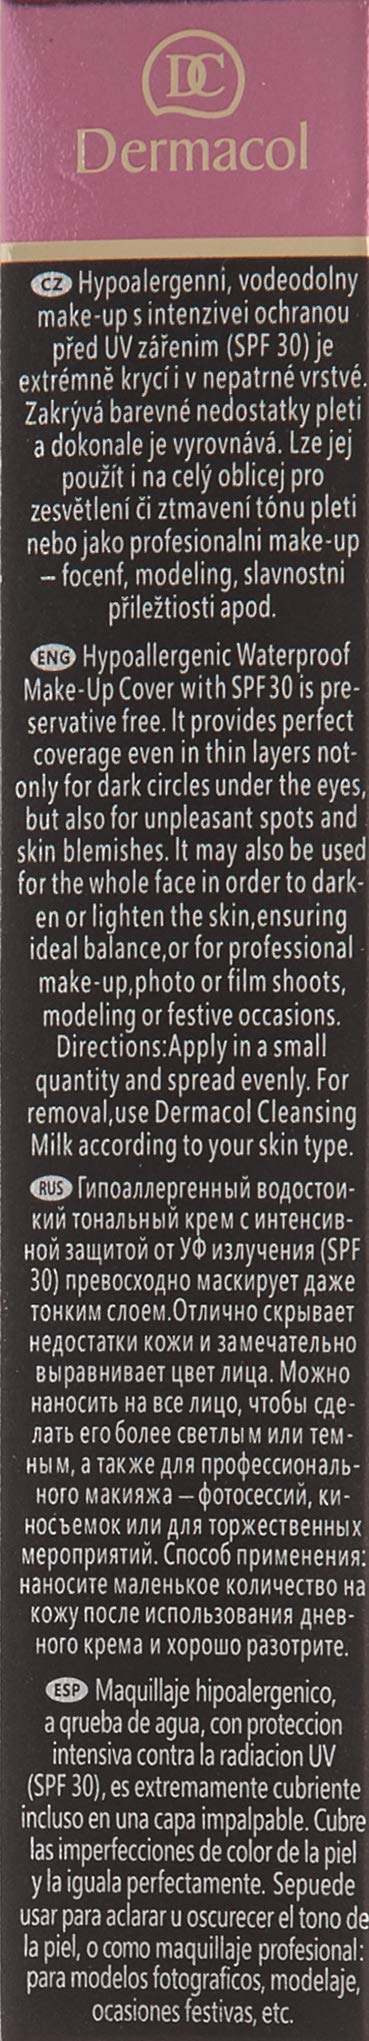 Dermacol Make-Up Cover, Waterproof Hypoallergenic for All Skin Types - 222